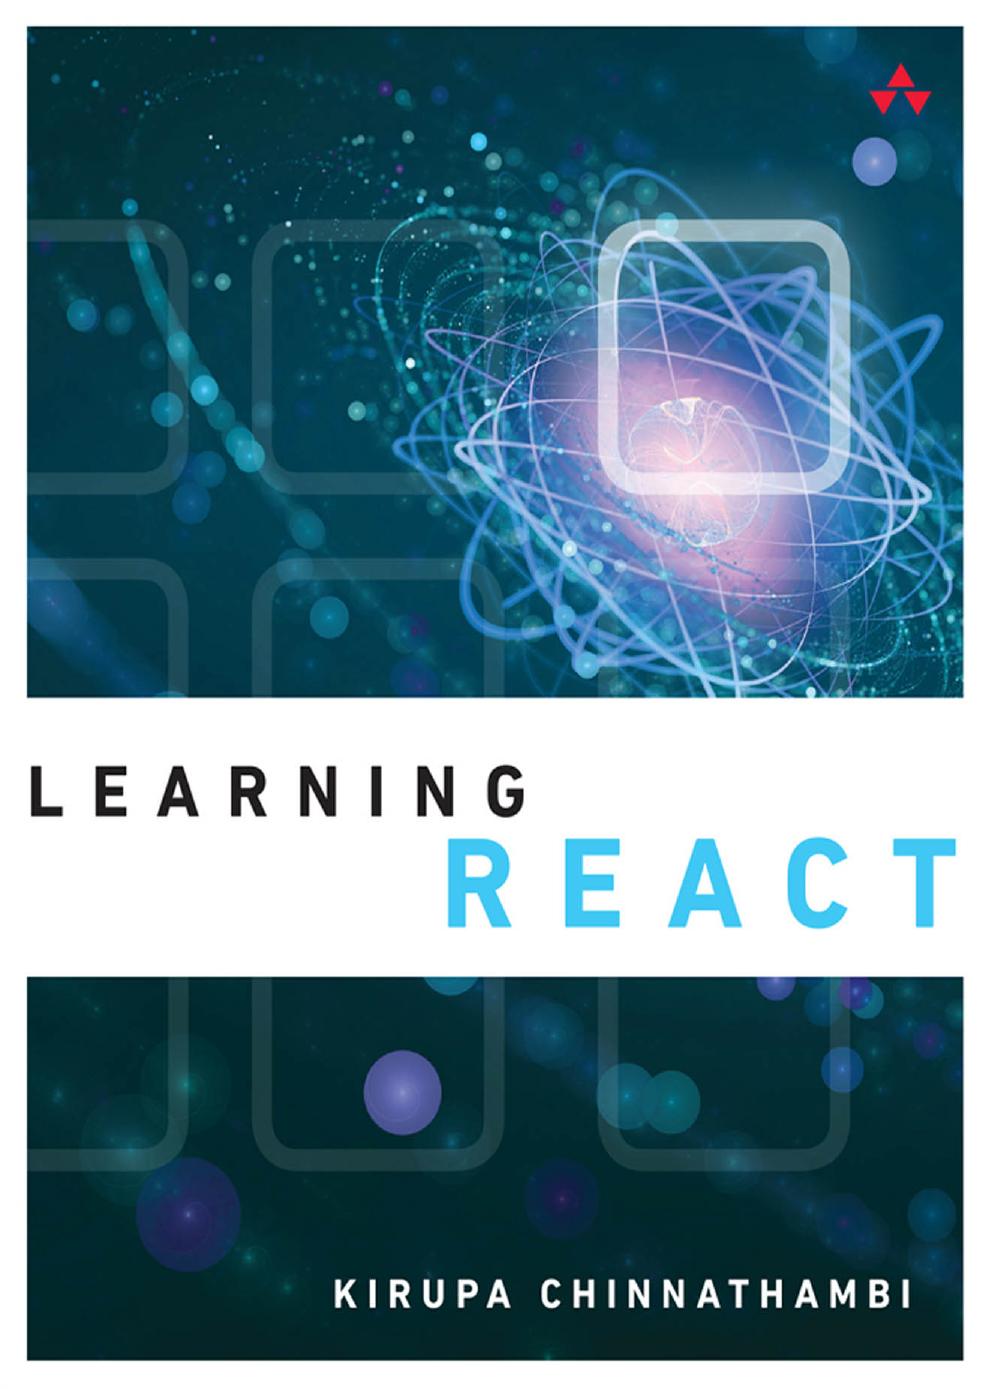 Learning React: A Hands-On Guide to Building Maintainable, High-Performing Web Application User Interfaces using the React JavaScript Library